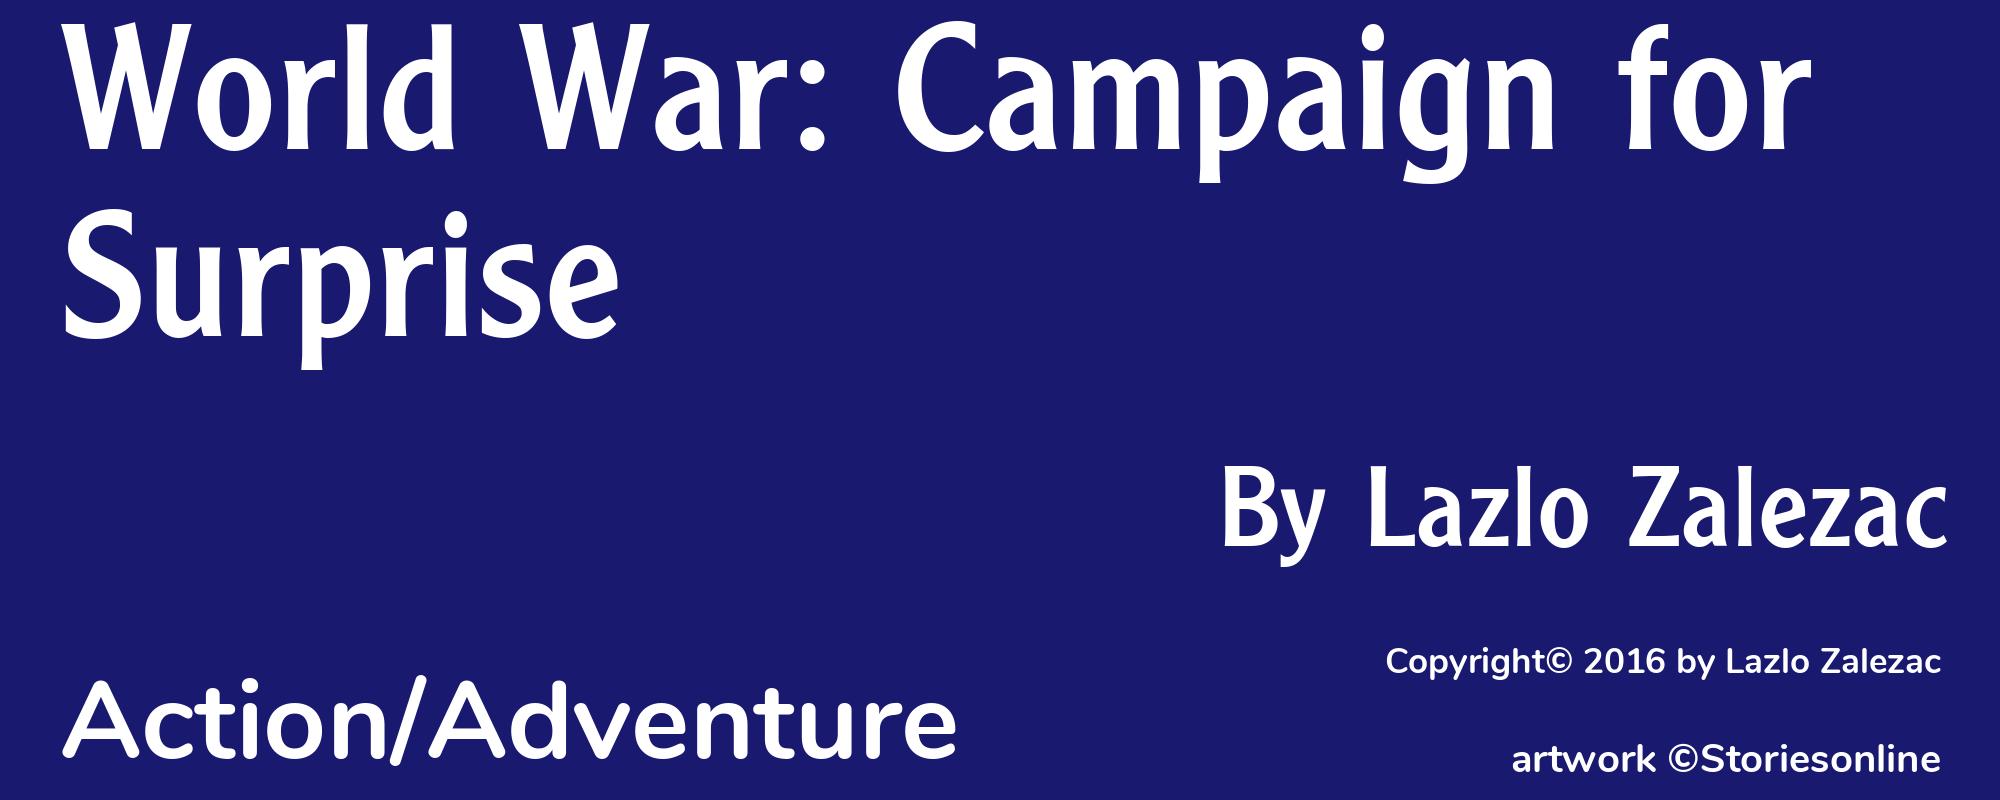 World War: Campaign for Surprise - Cover